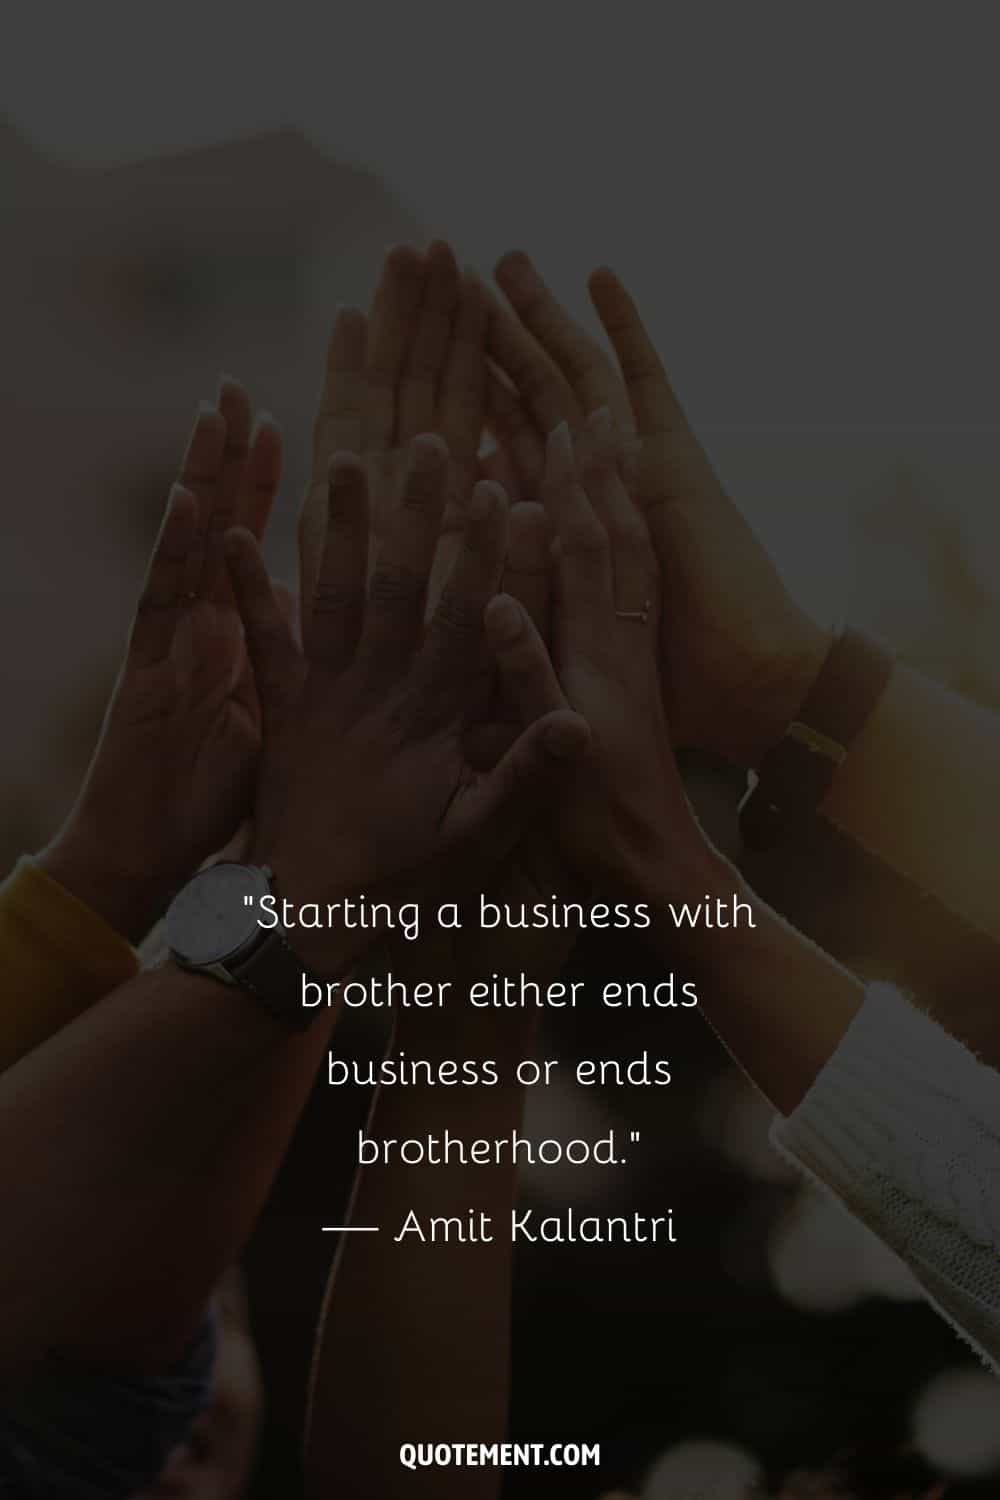 “Starting a business with brother either ends business or ends brotherhood.” — Amit Kalantri